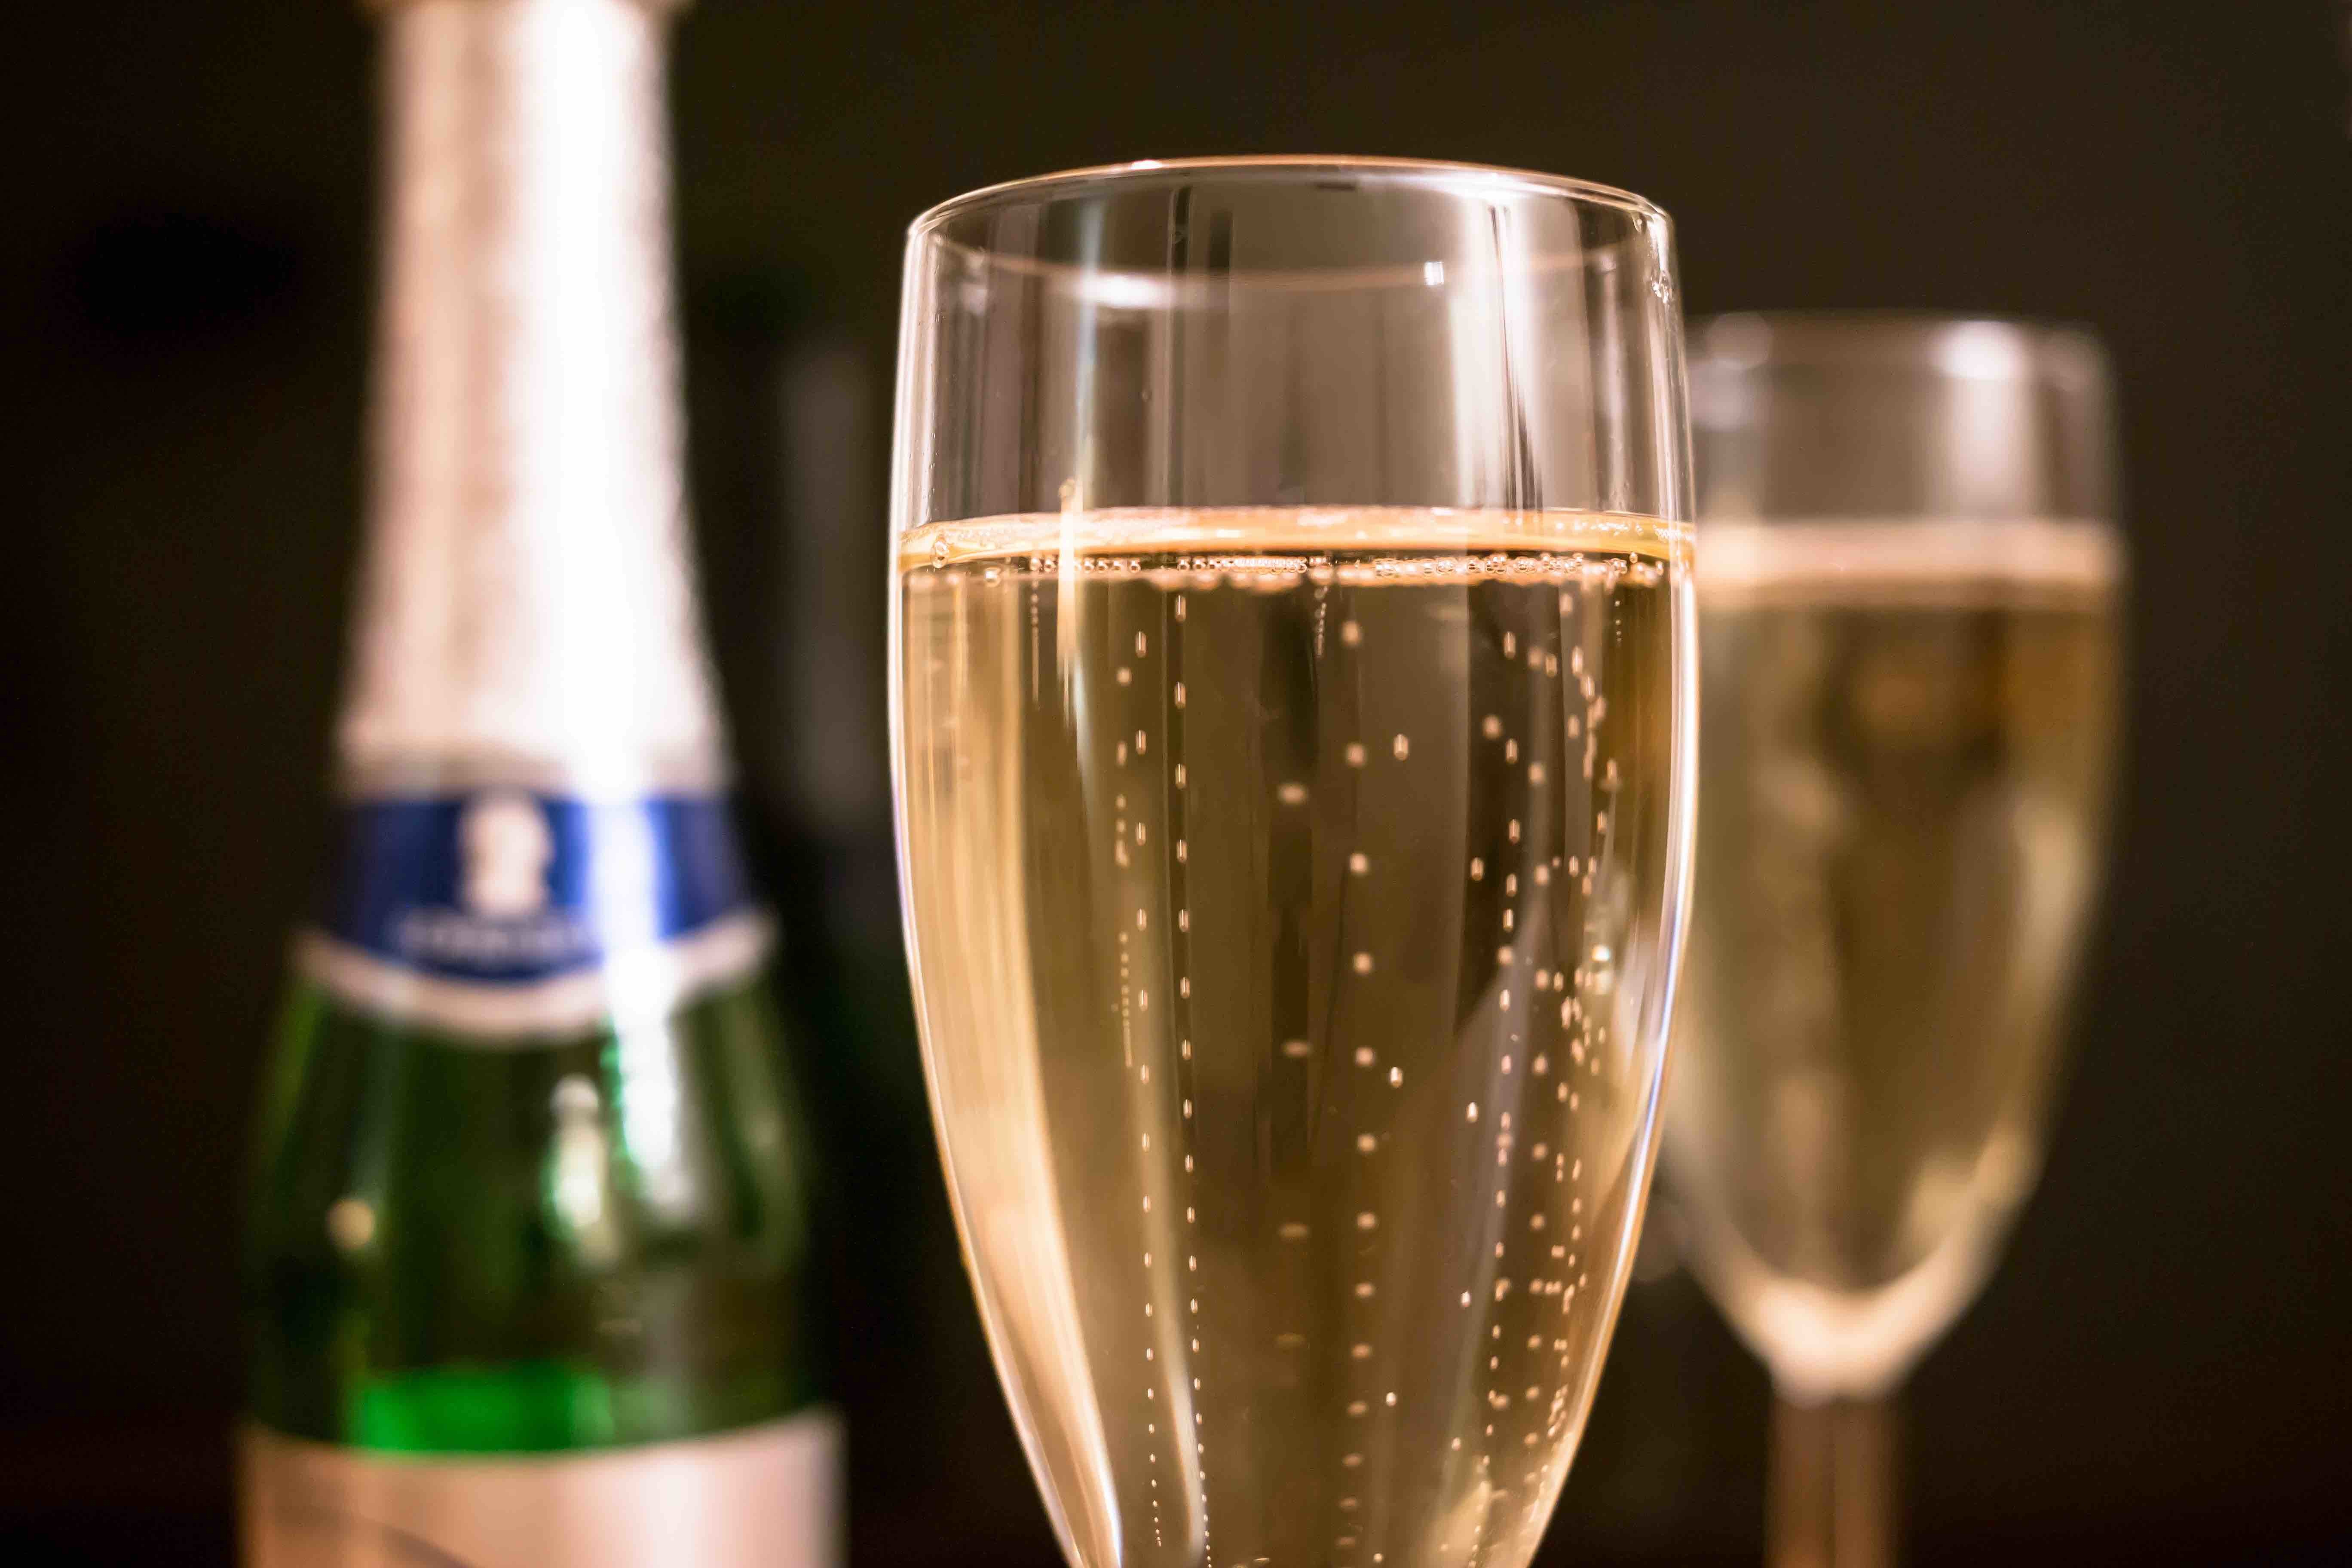 French Sparkling Wines - 6 Crémants